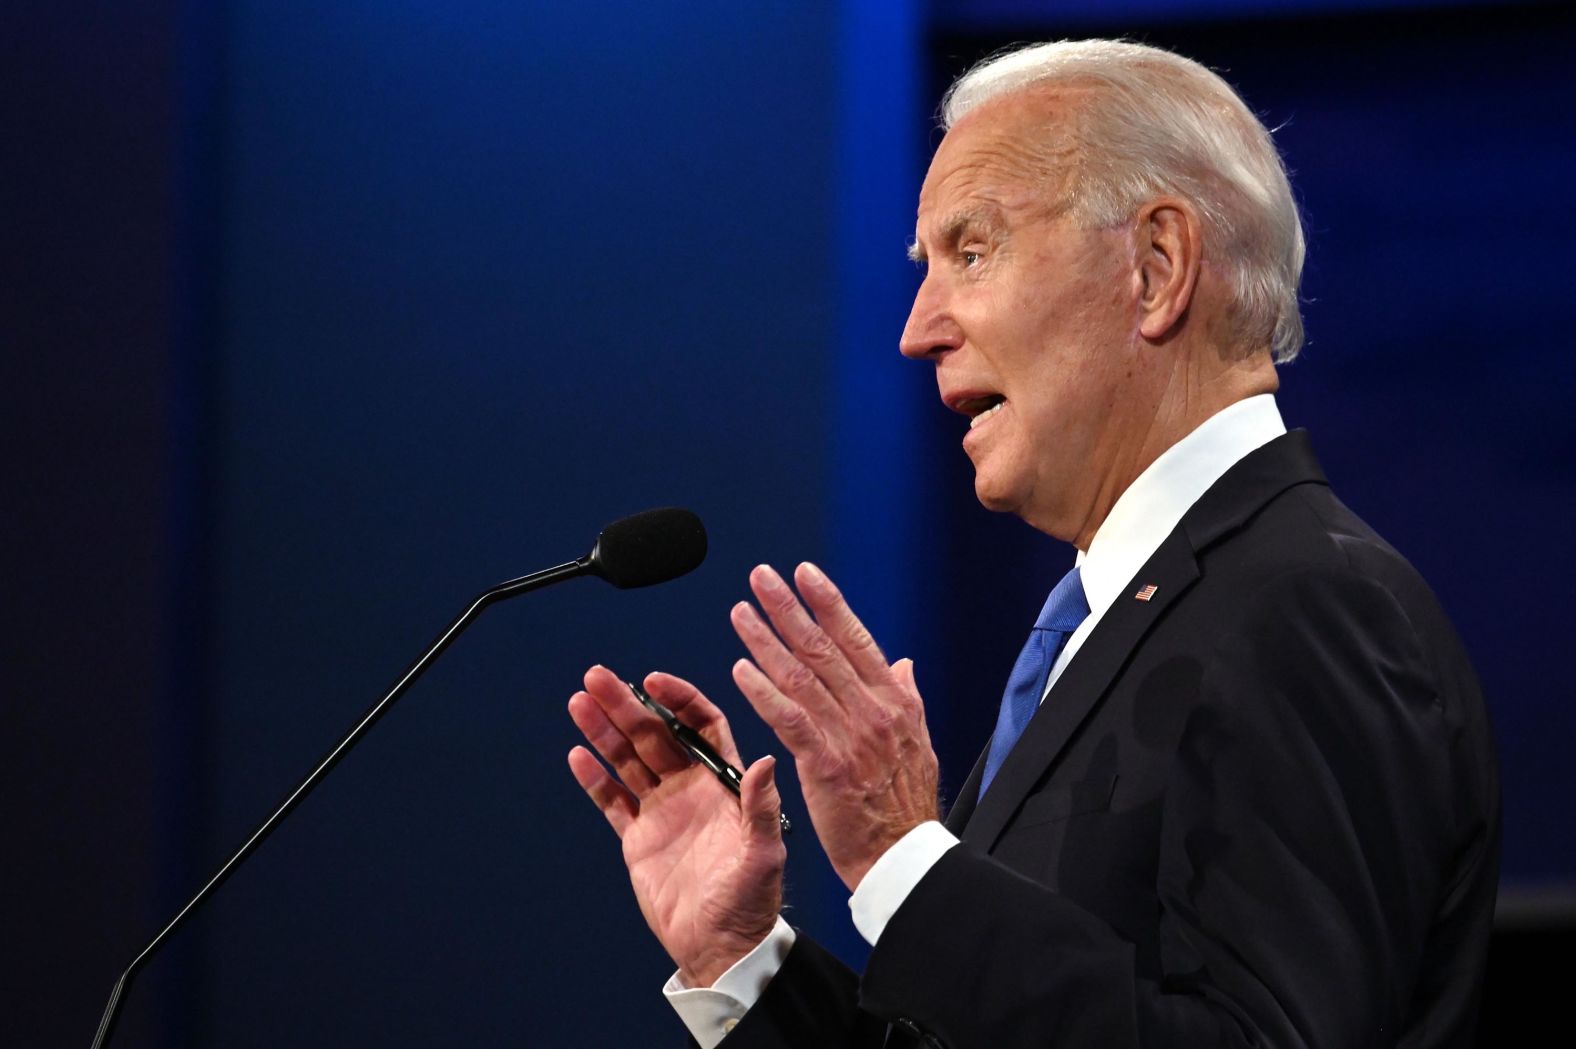 Biden answers a question during the debate.